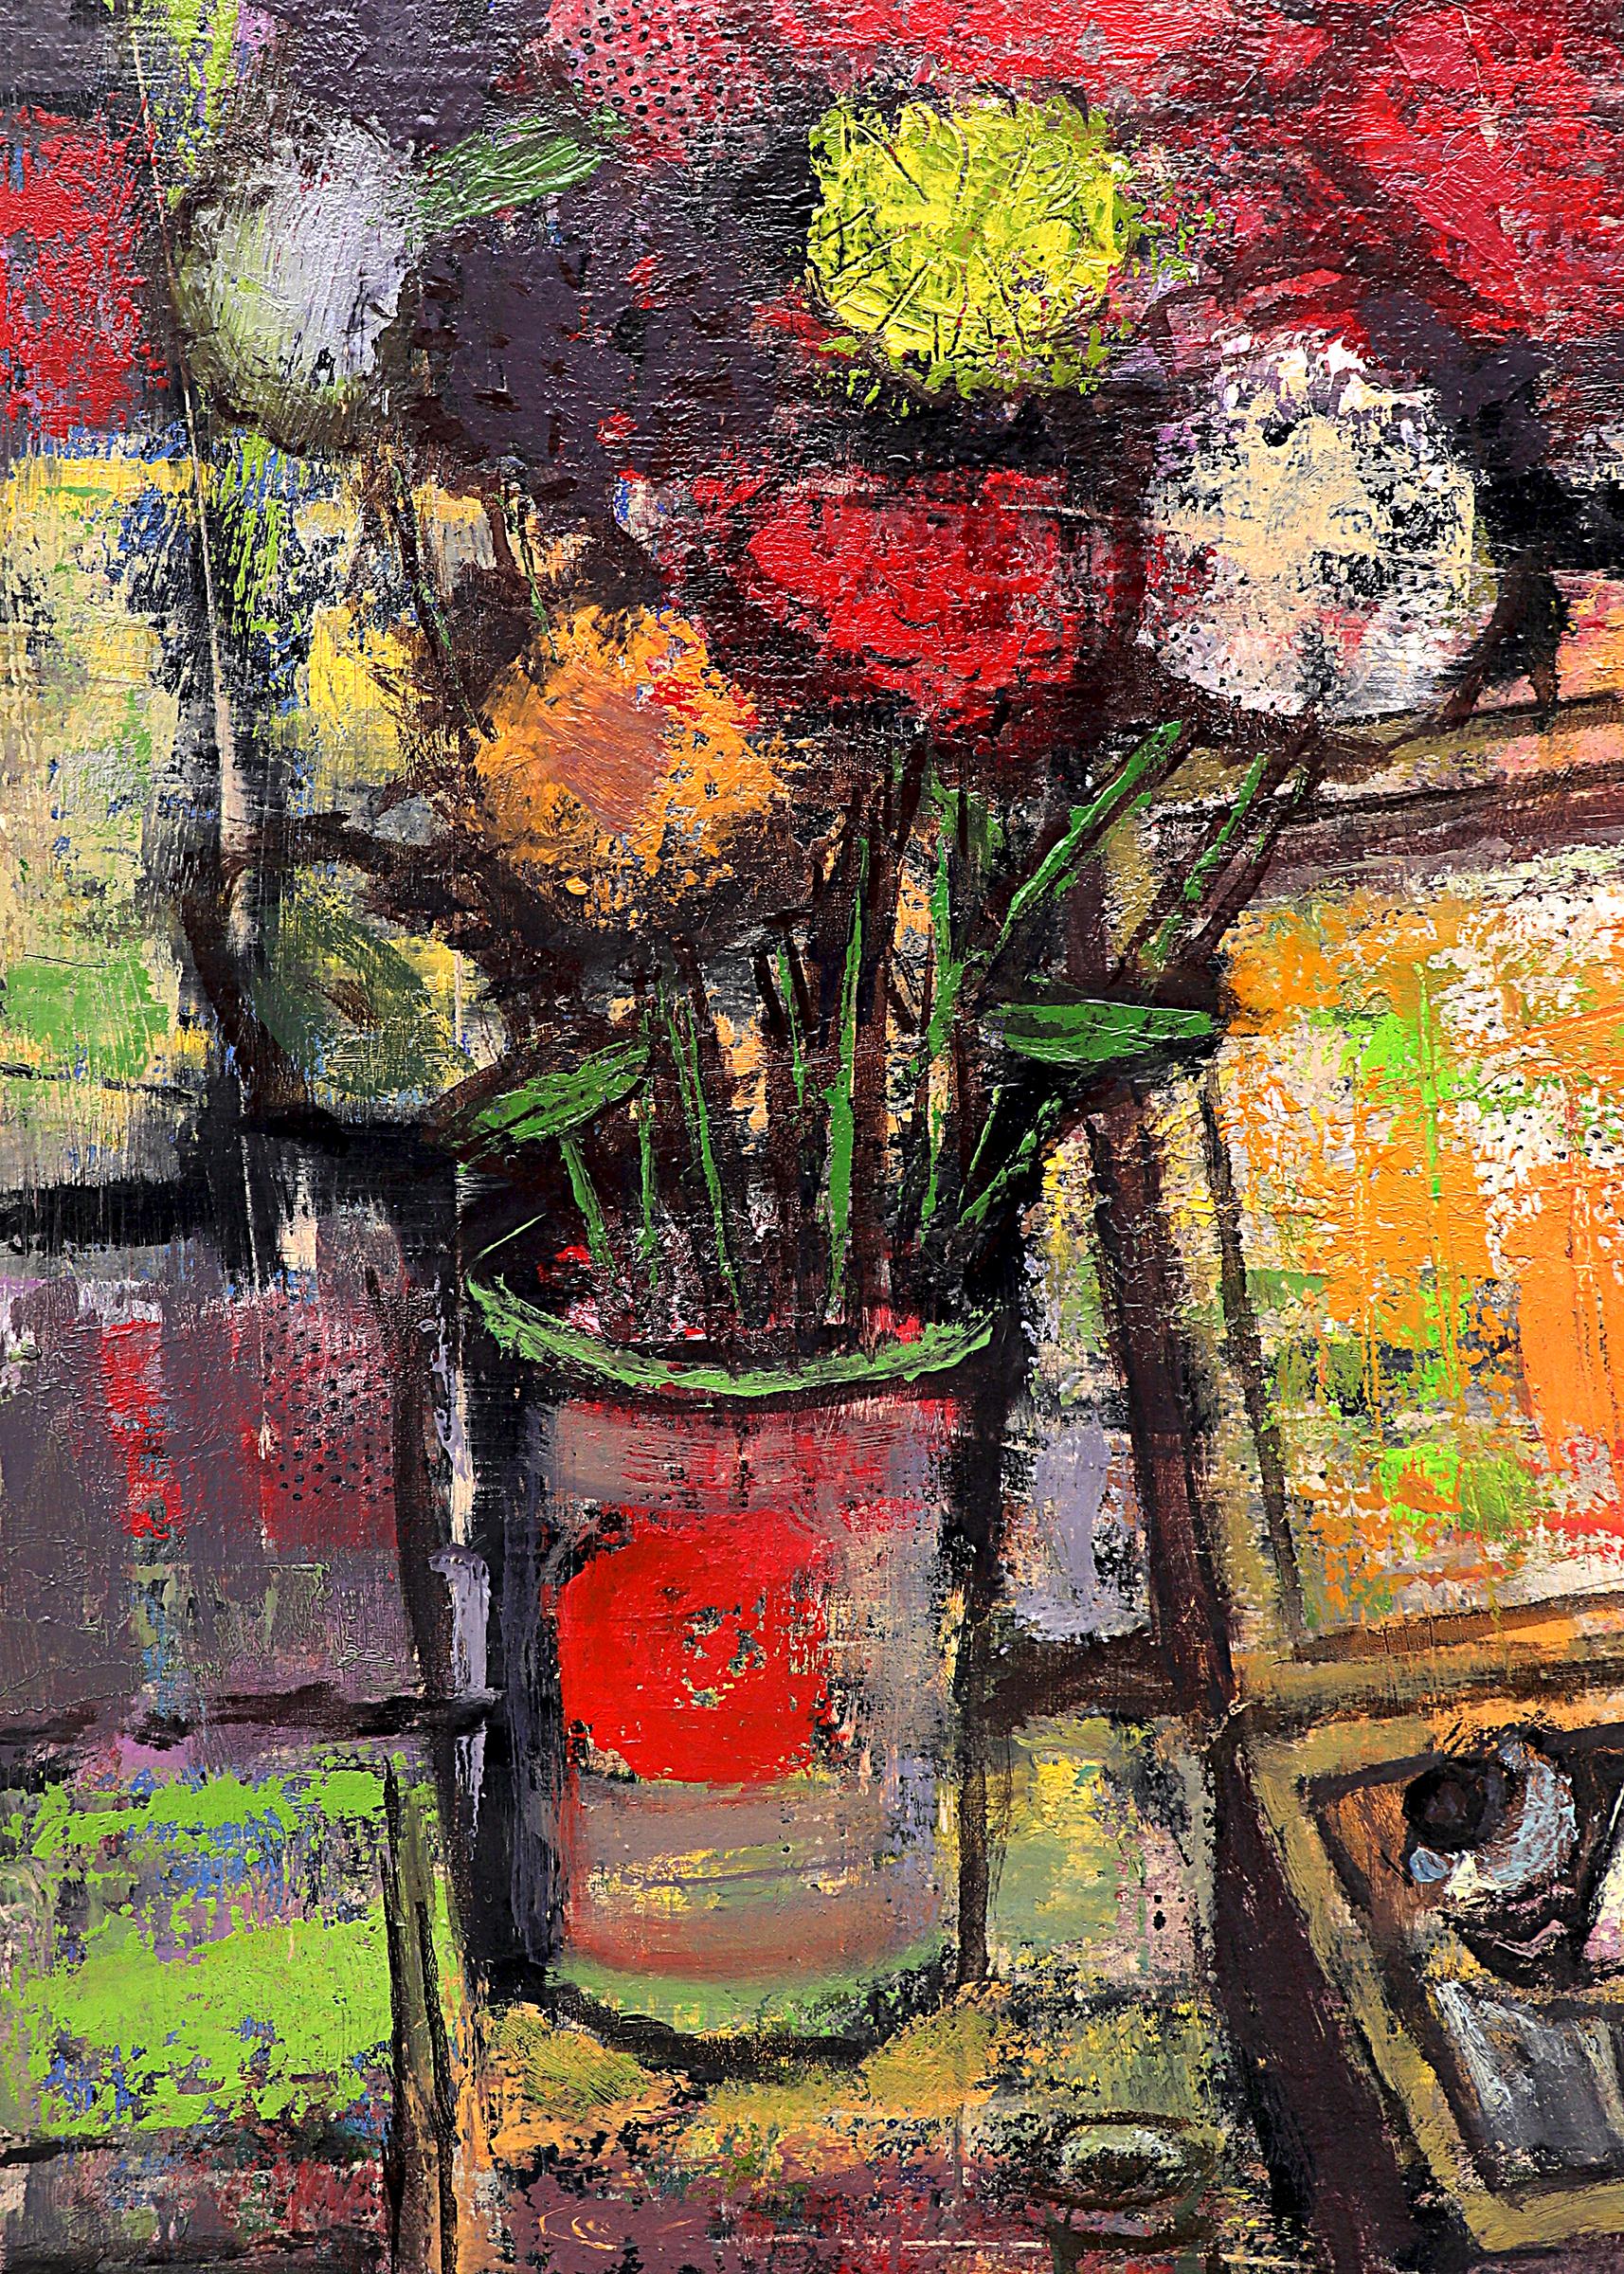 Oil on canvas painting by mid 20th century Denver artist Paul K. Smith. Semi abstract interior scene of an artists studio with flowers, paint supplies, and an easel with completed paintings. Presented framed, outer dimensions measure 40 ⅞ x 34 ⅝ x ¾